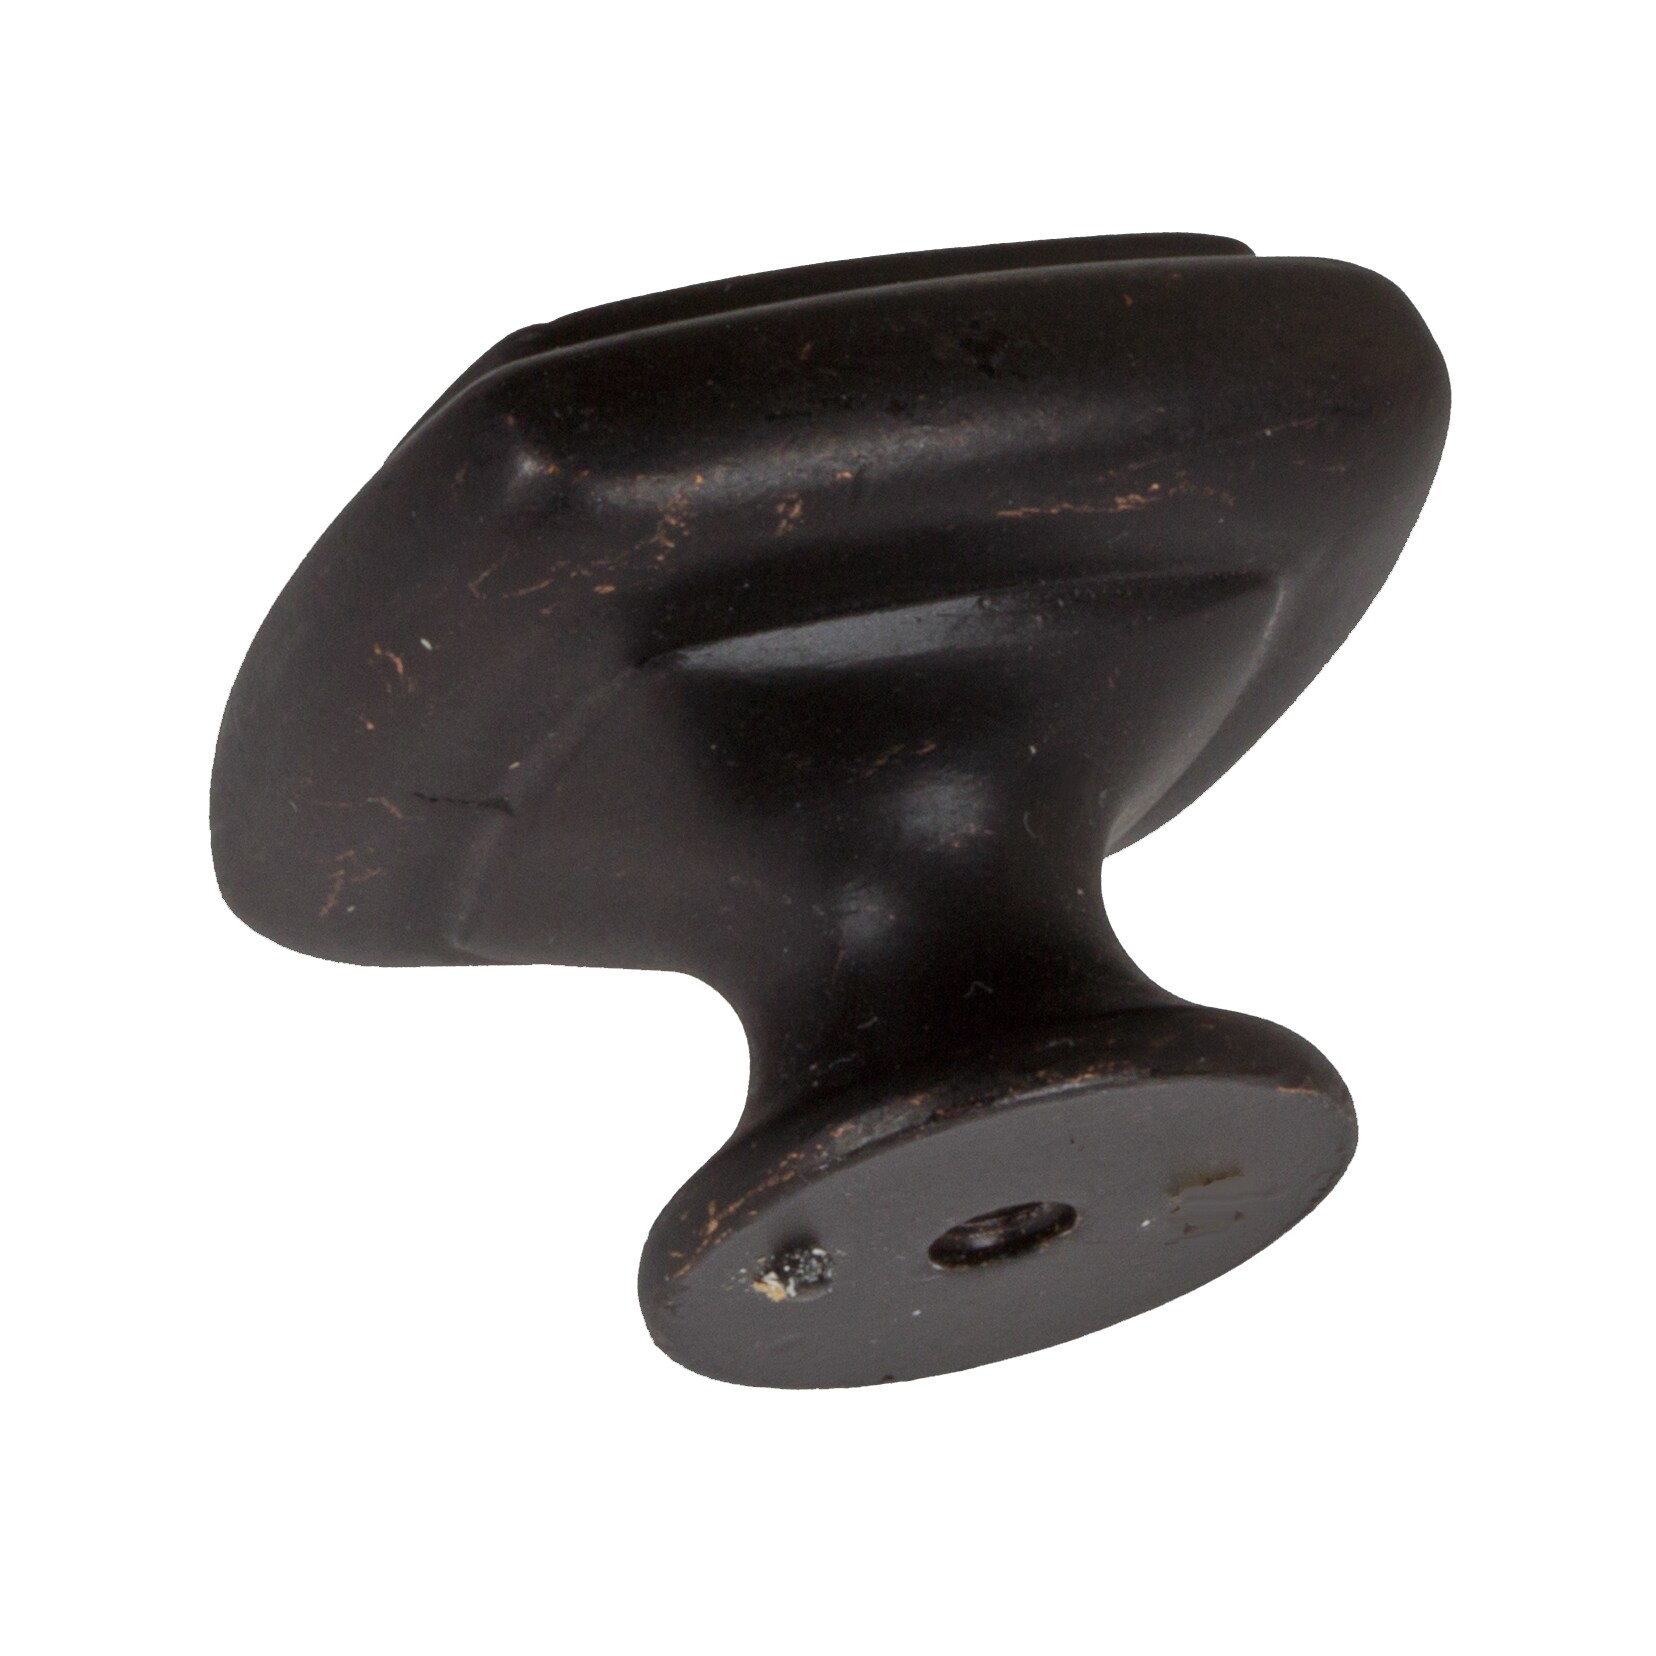 GlideRite 1-1/4 in. Transitional Dotted Square Cabinet Knobs, Oil Rubbed Bronze, Pack of 10 - image 4 of 4